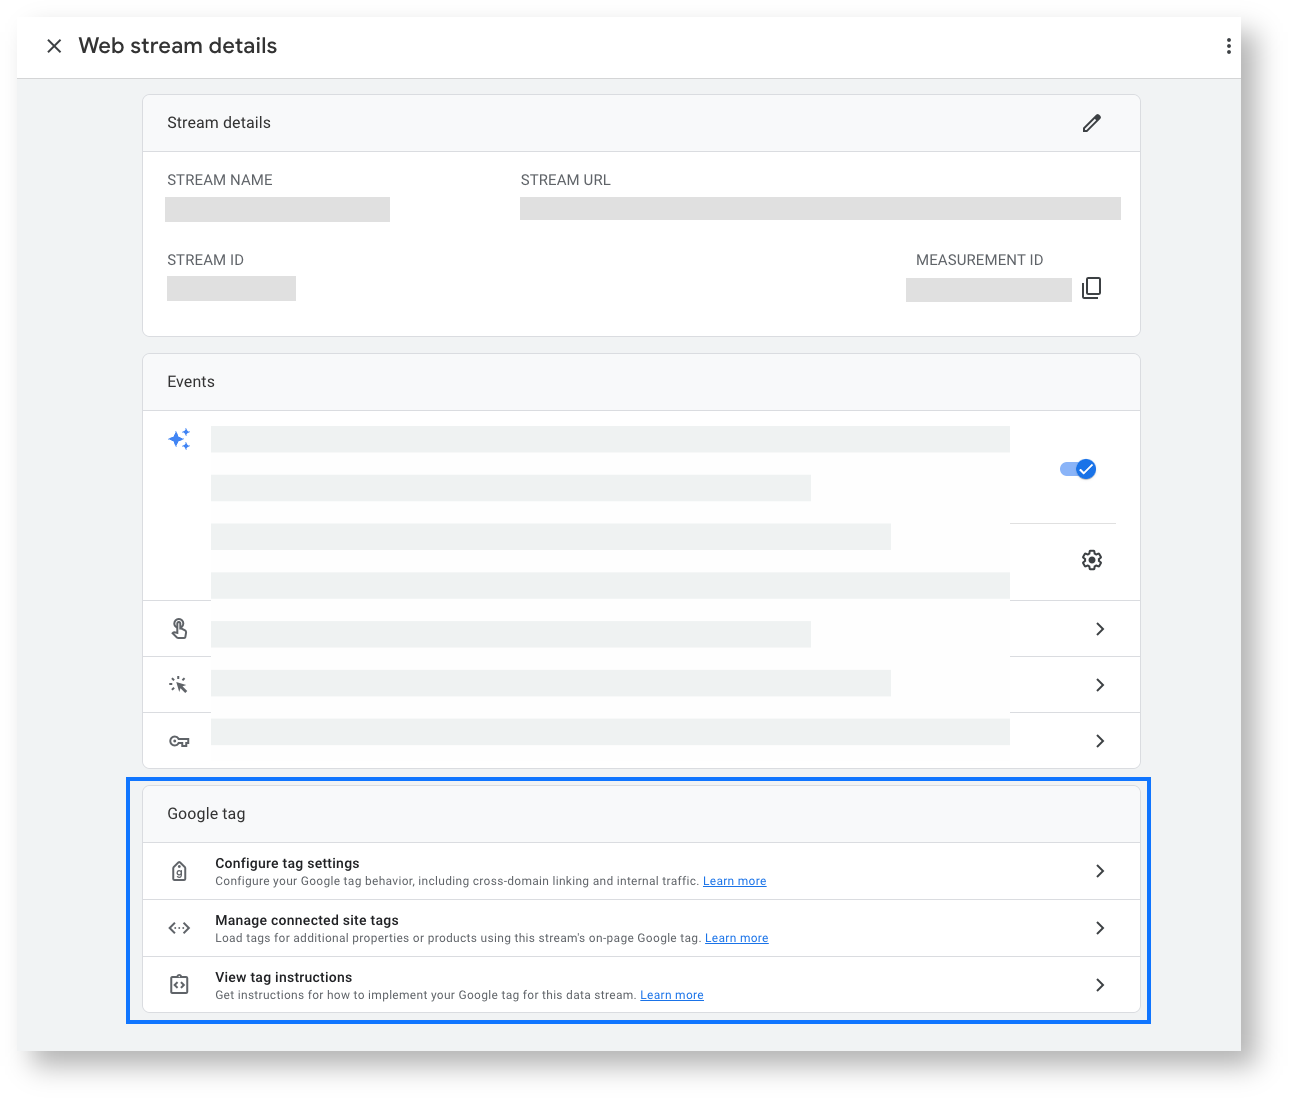 The Web stream details panel shows the Google tag ID and installation instructions needed to connect your website to Analytics.